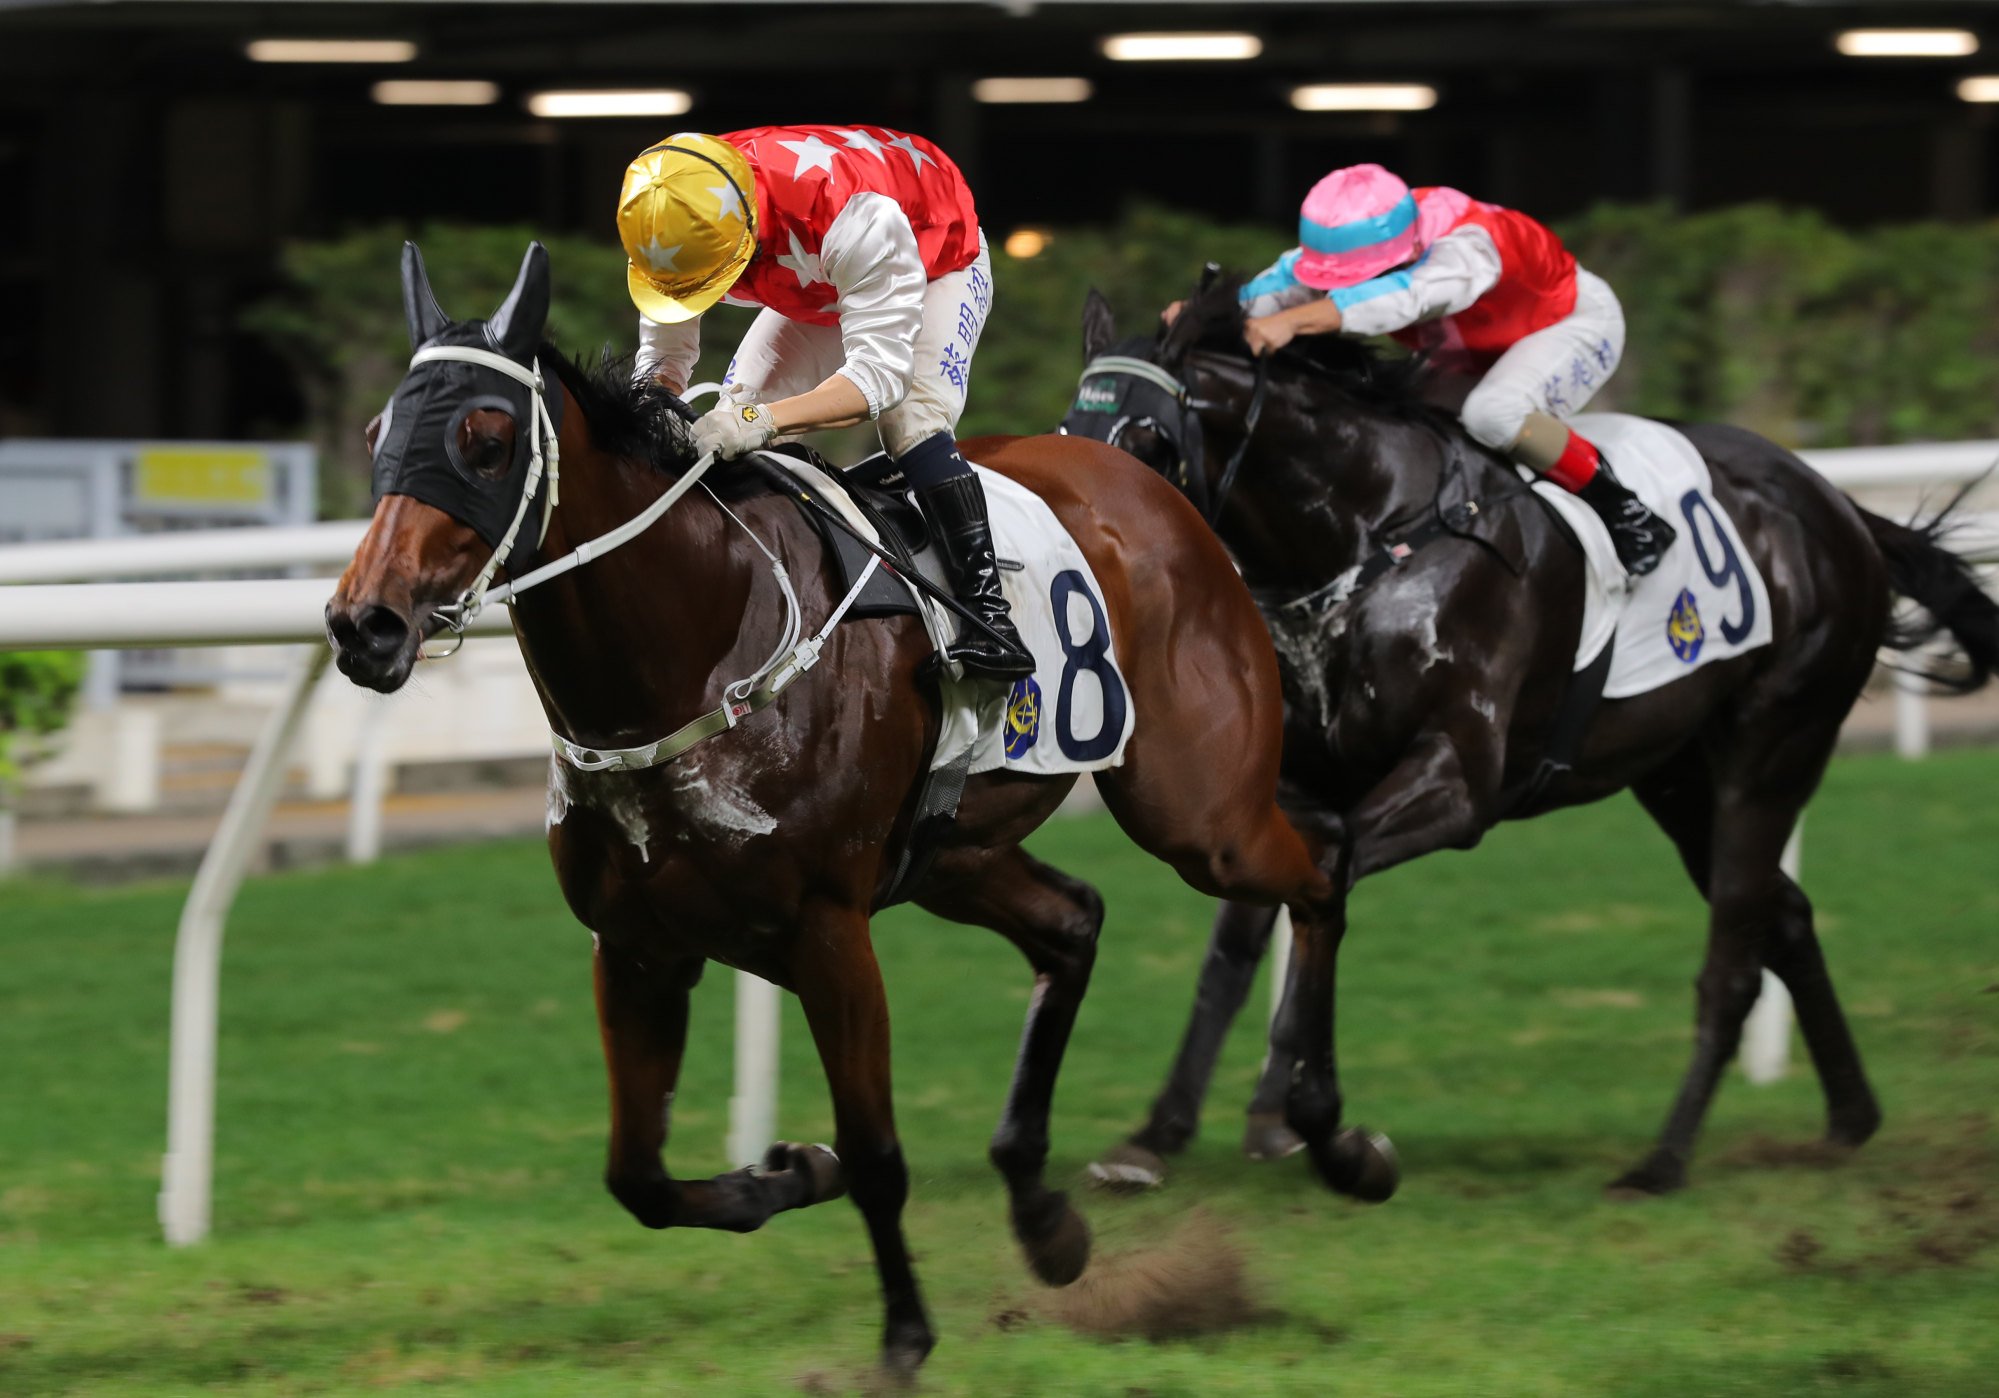 Superb Capitalist scores again at Happy Valley for Matthew Chadwick.